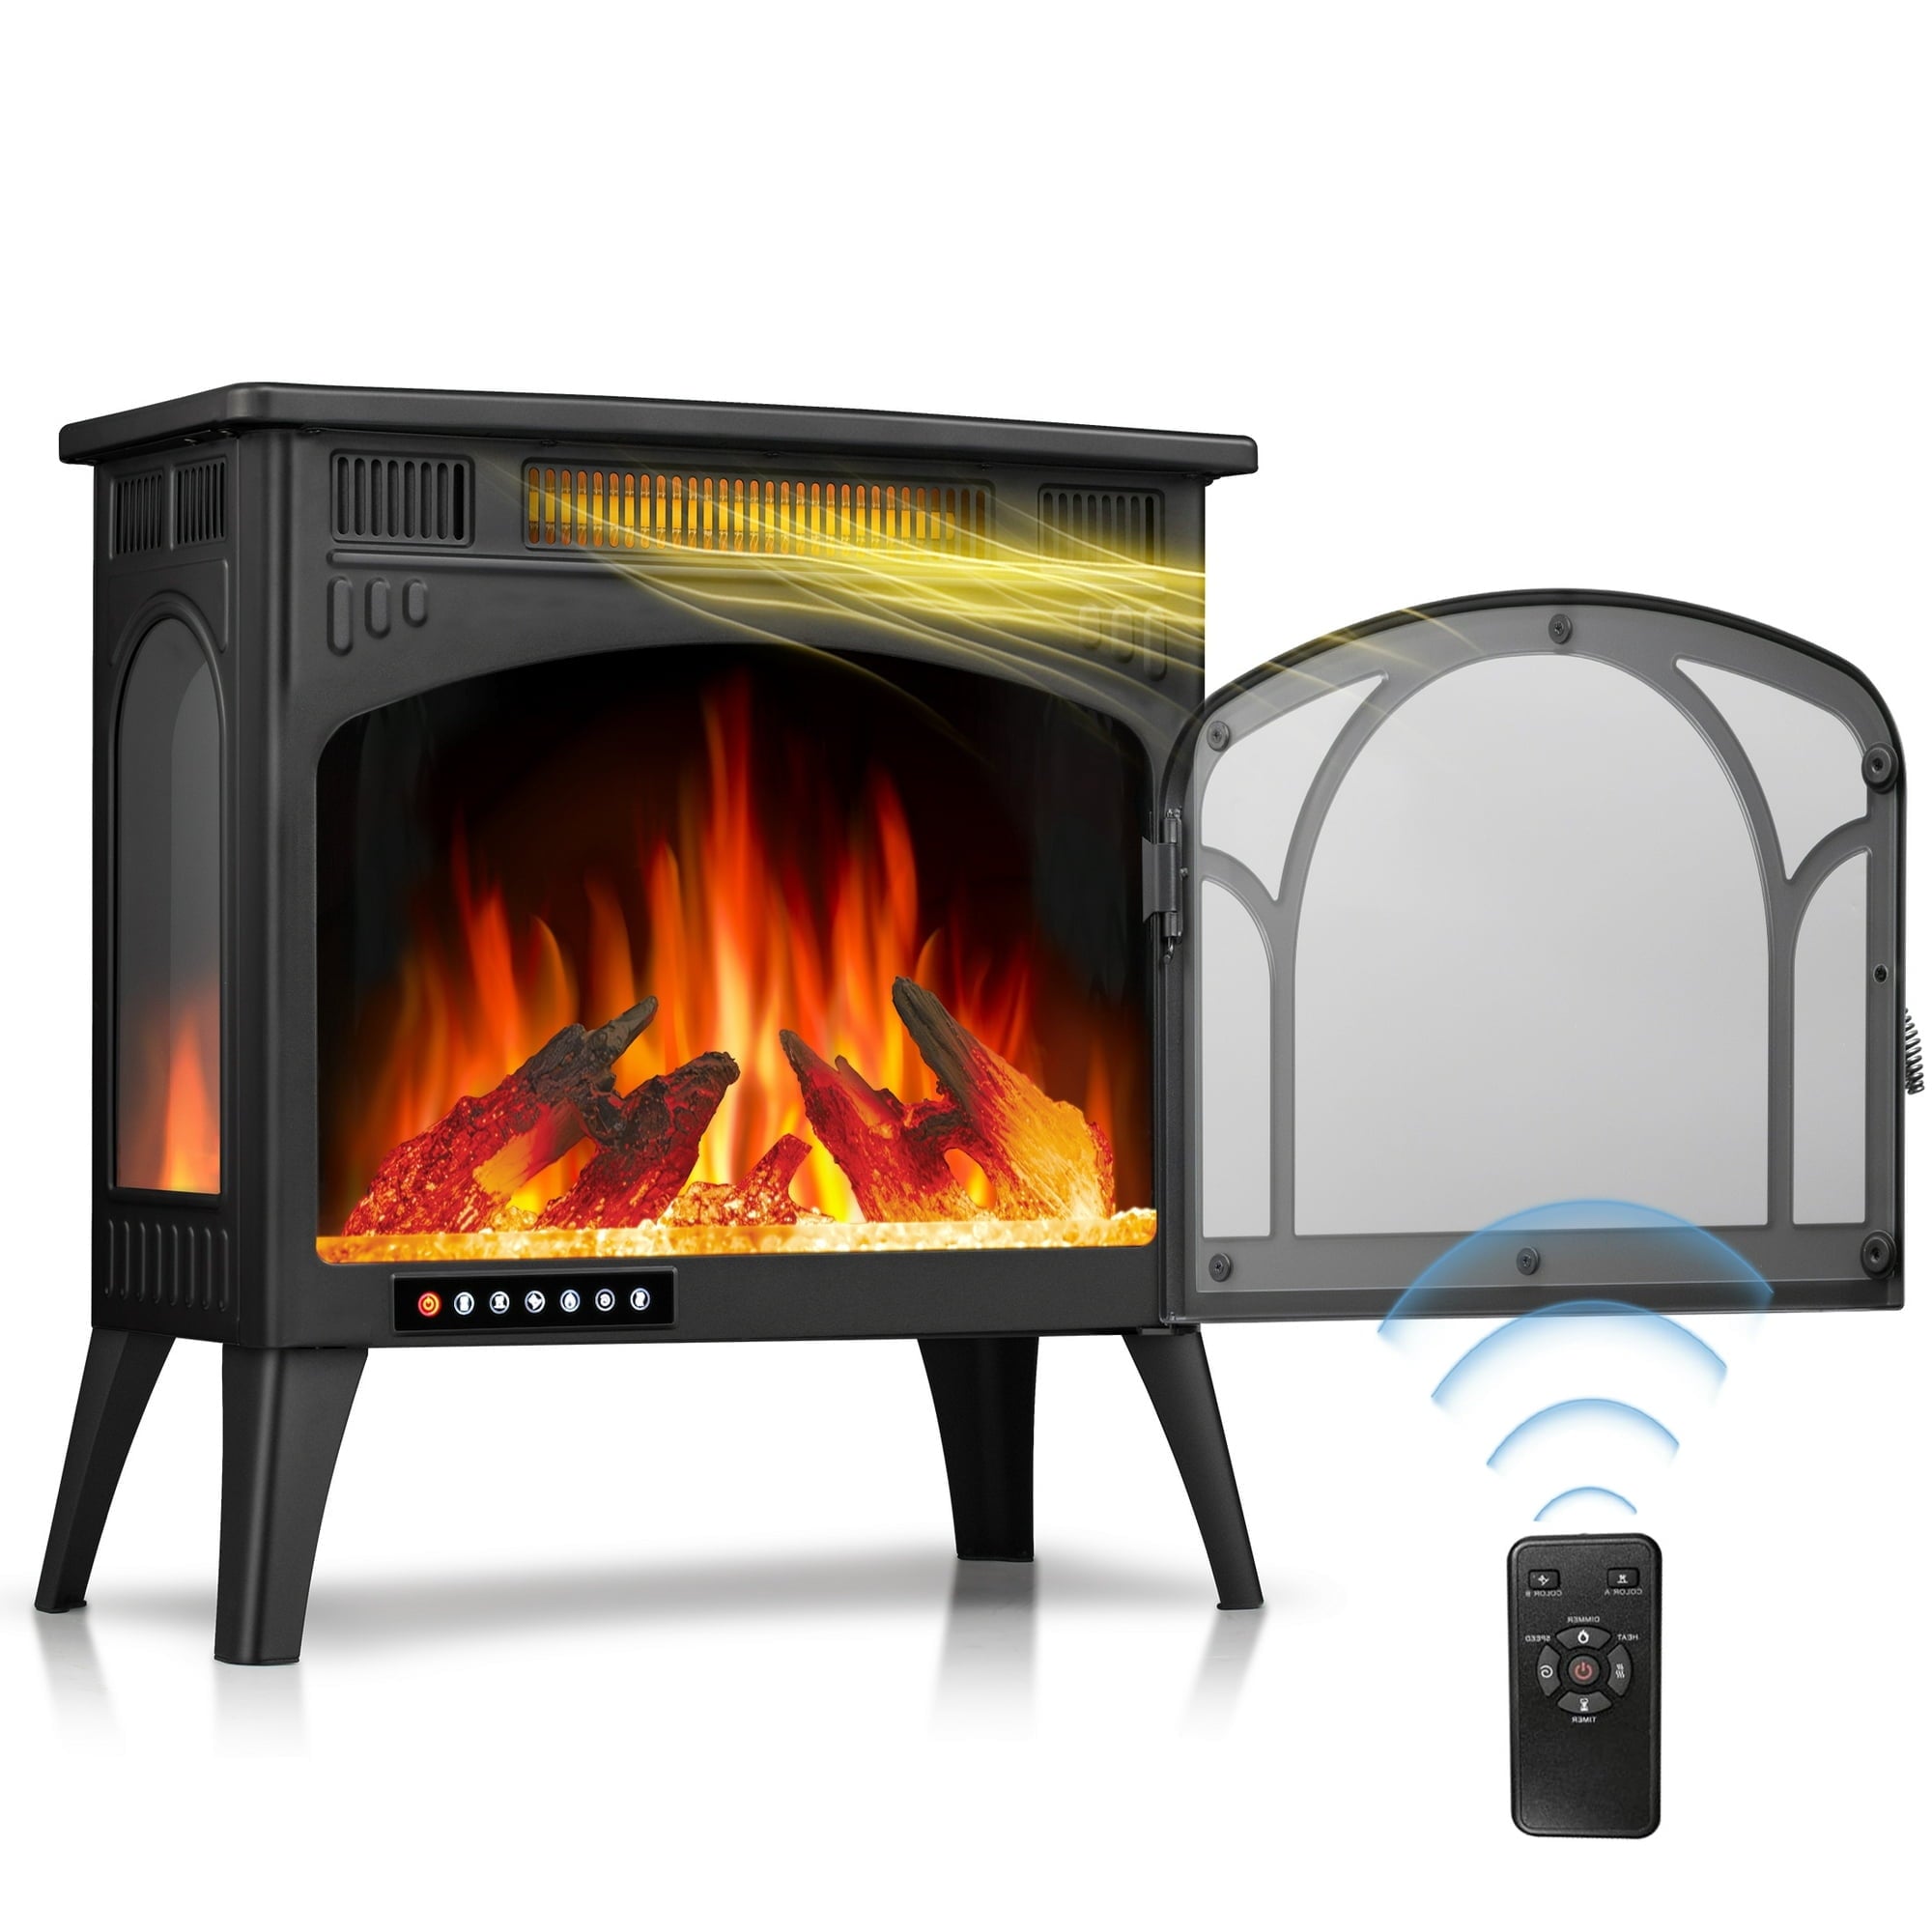 R.W.FLAME Electric Fireplace Heater 25" with 3D Realistic Flame Effect, Freestanding Fireplace, Different Flame Color, 500W/1500W,- Black